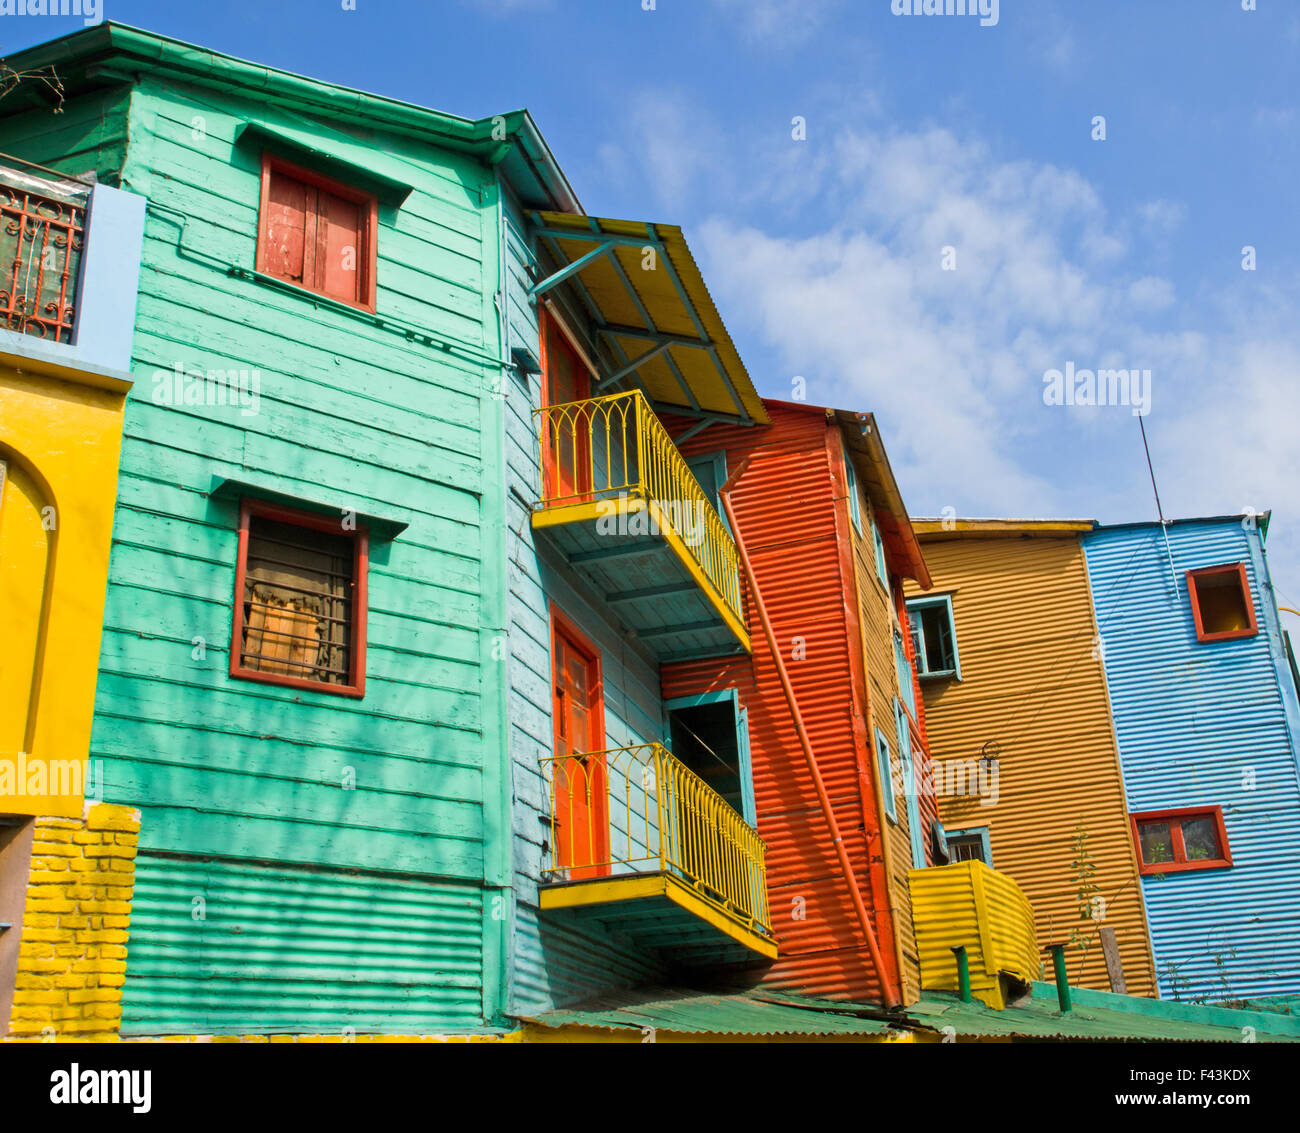 The famous colourful buildings of La Boca in Buenos Aires Stock Photo